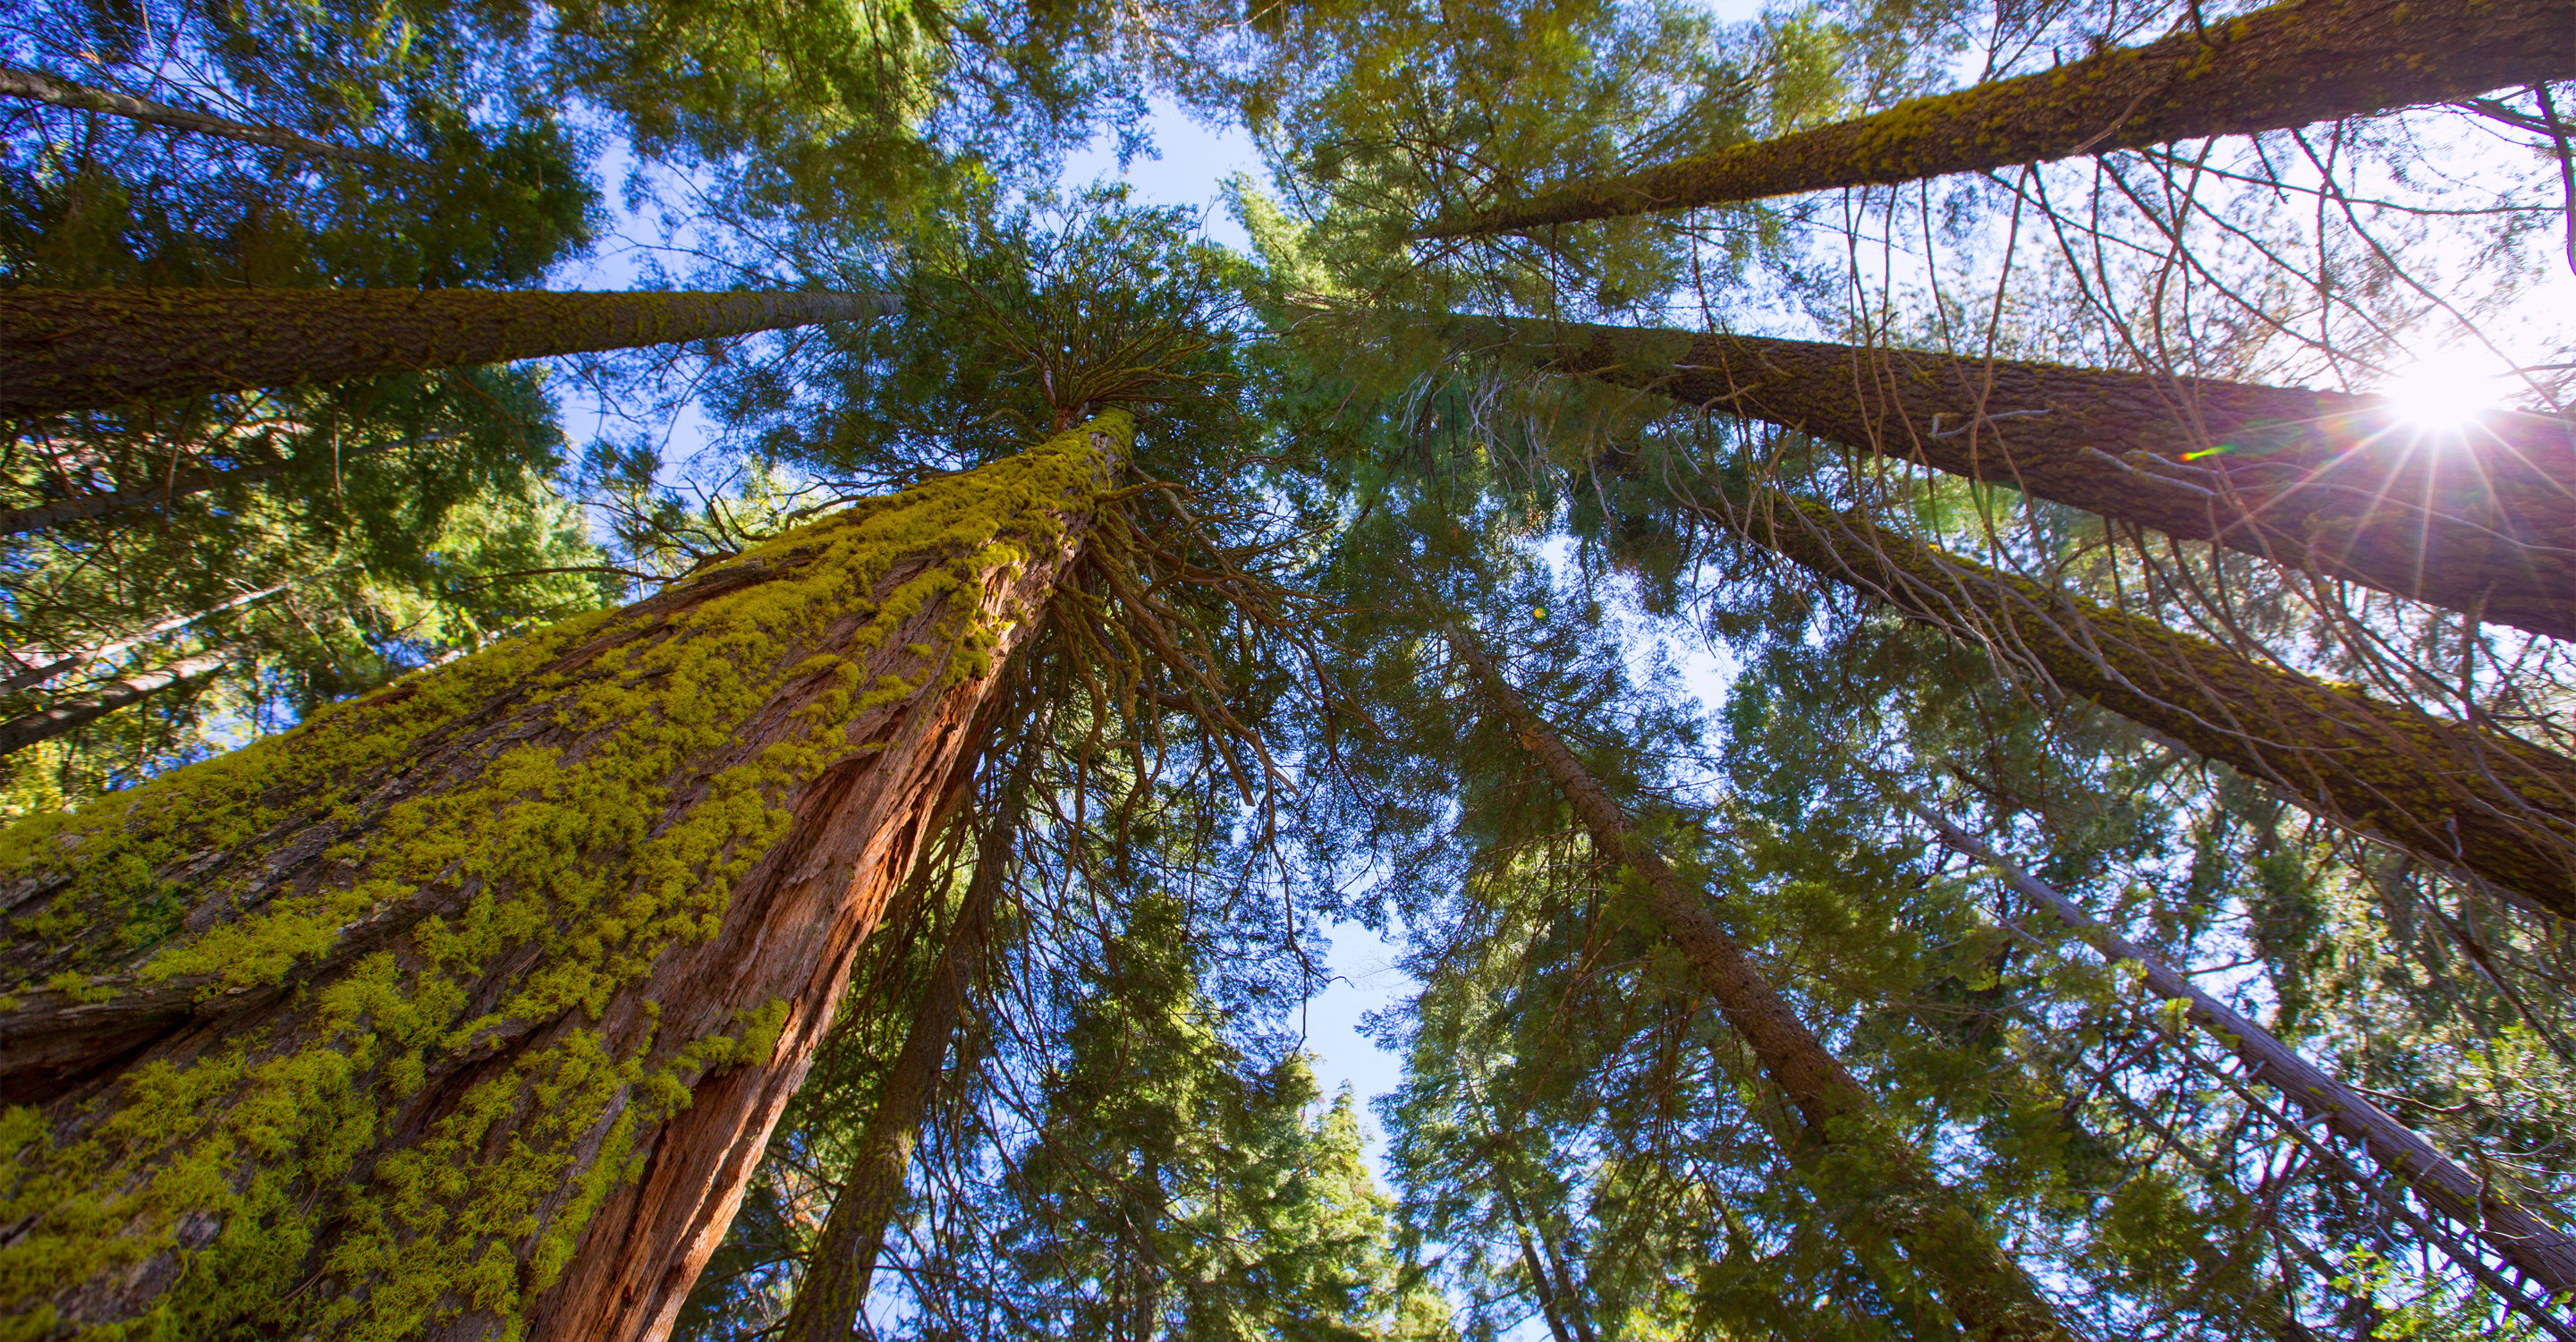 Looking up at Sequoias in Mariposa Grove, Yosemite National Park, United States